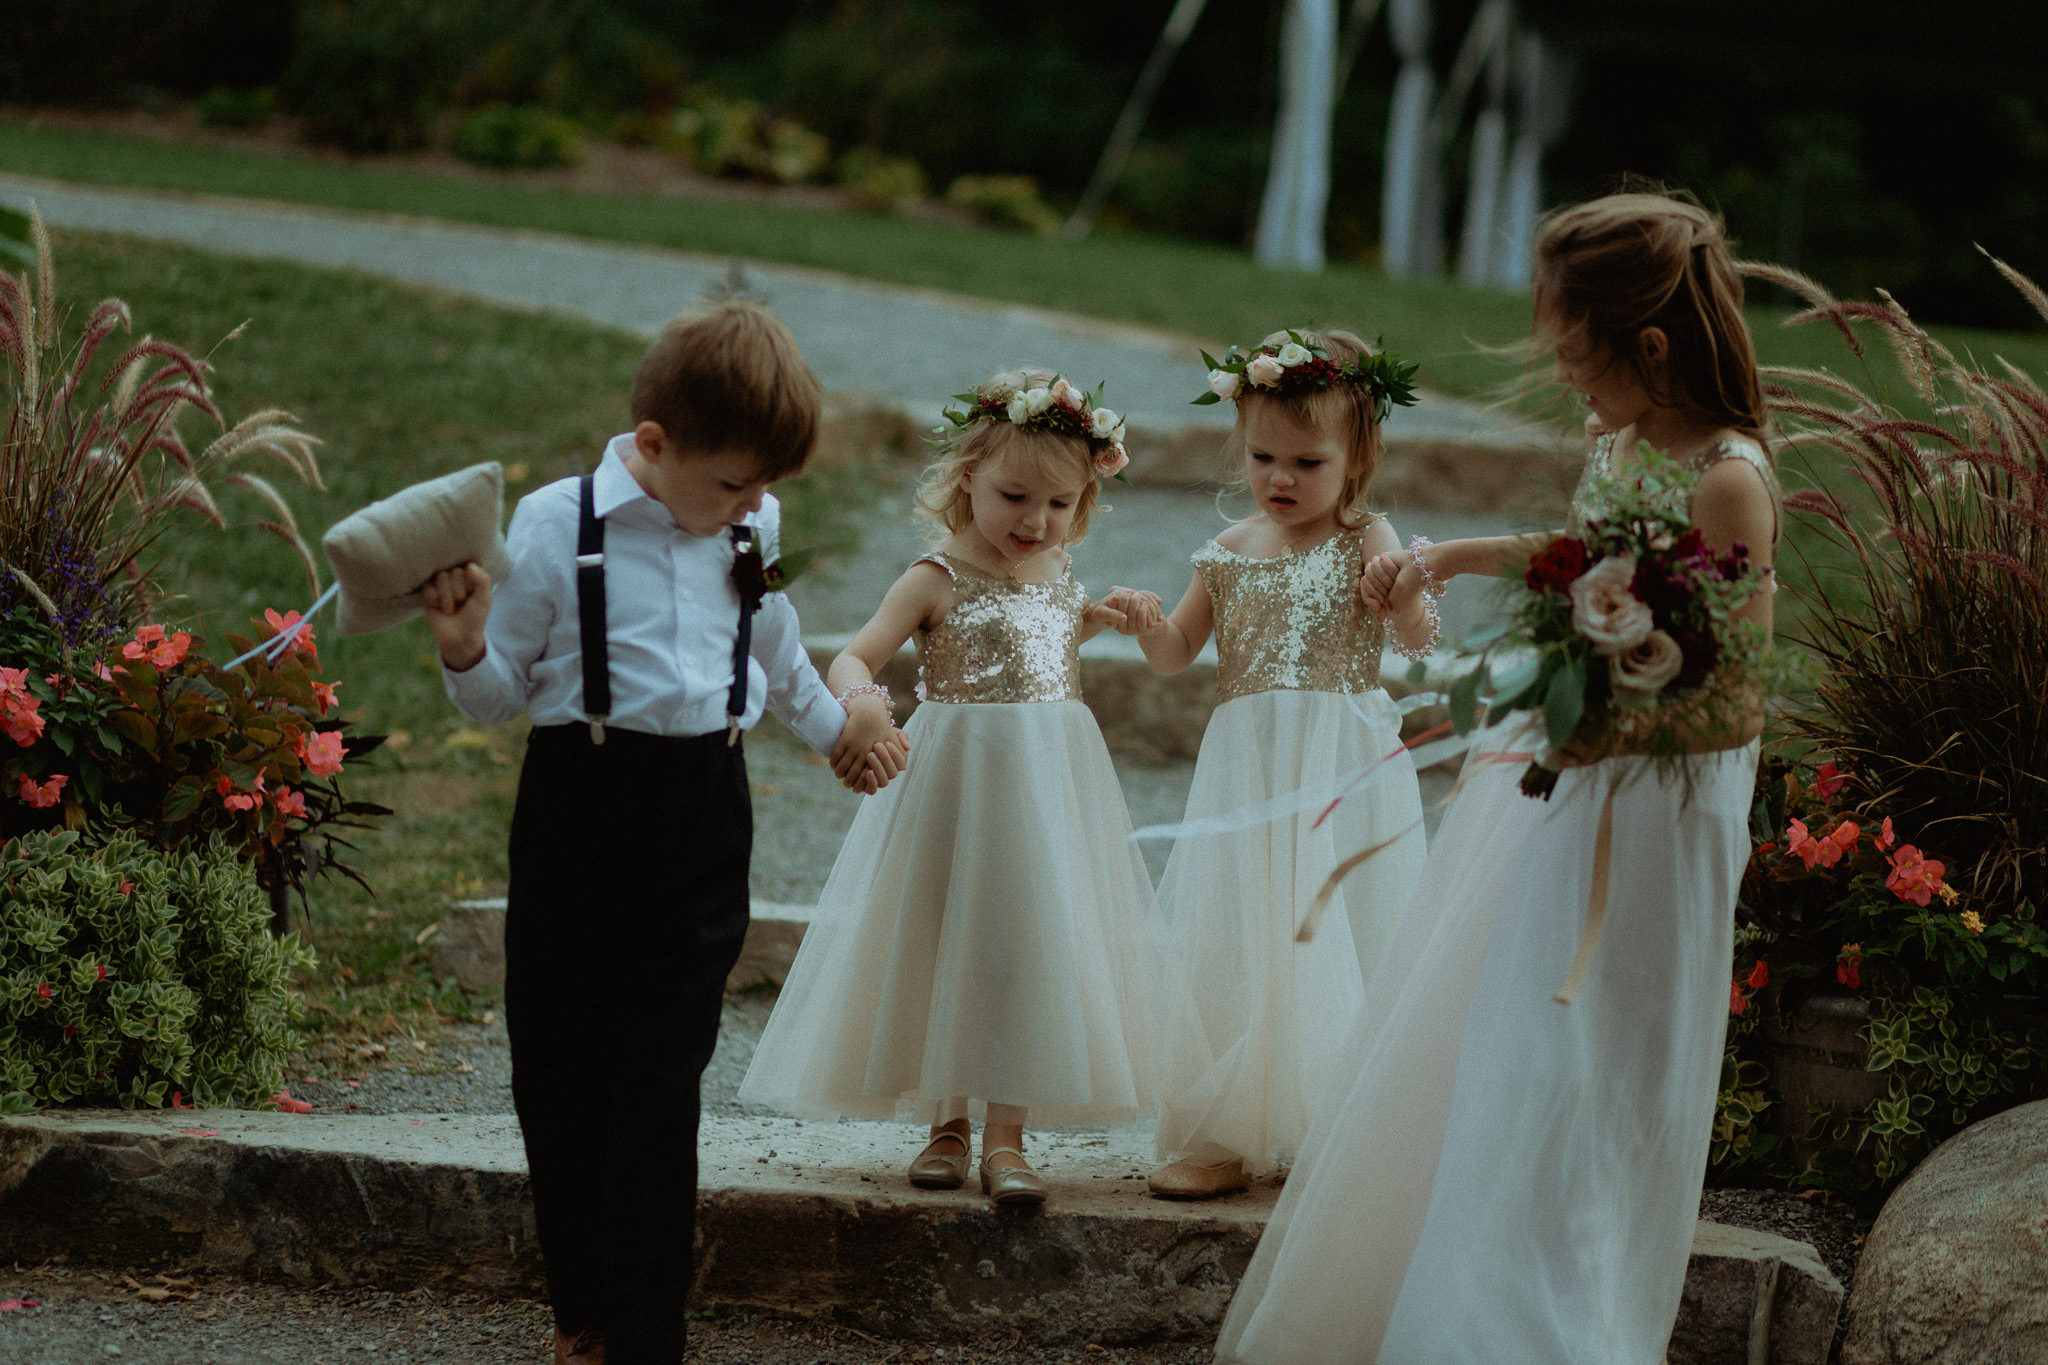 Ring bearer and flower girls entrance wedding photography outdoor barn venue peterborough